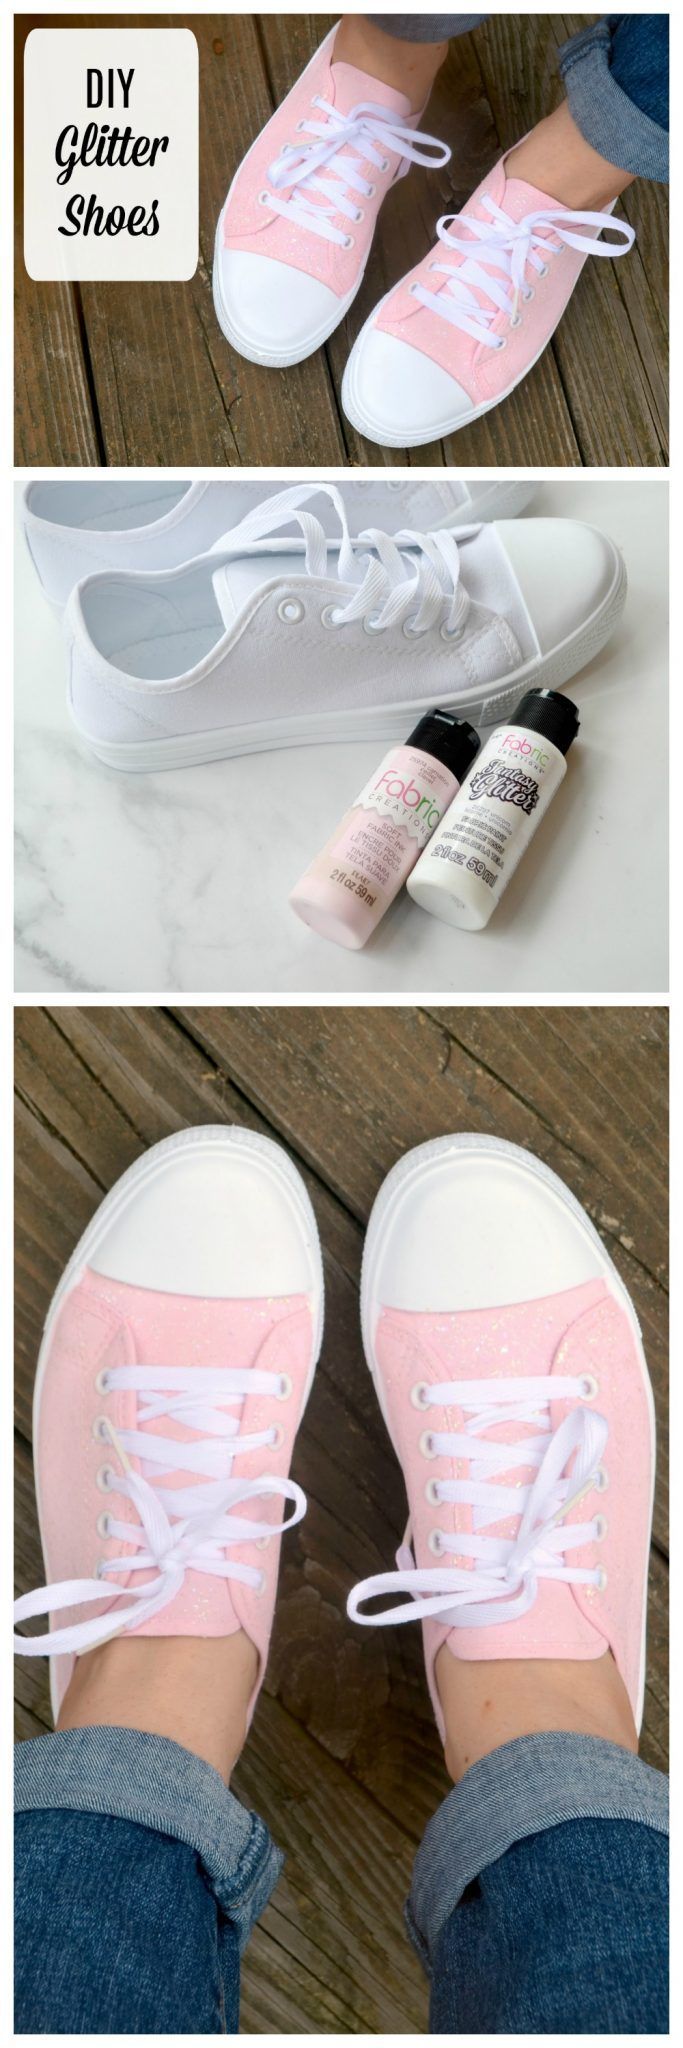 DIY Glitter Sneakers with Fabric Creations -   17 DIY Clothes Shoes fashion
 ideas